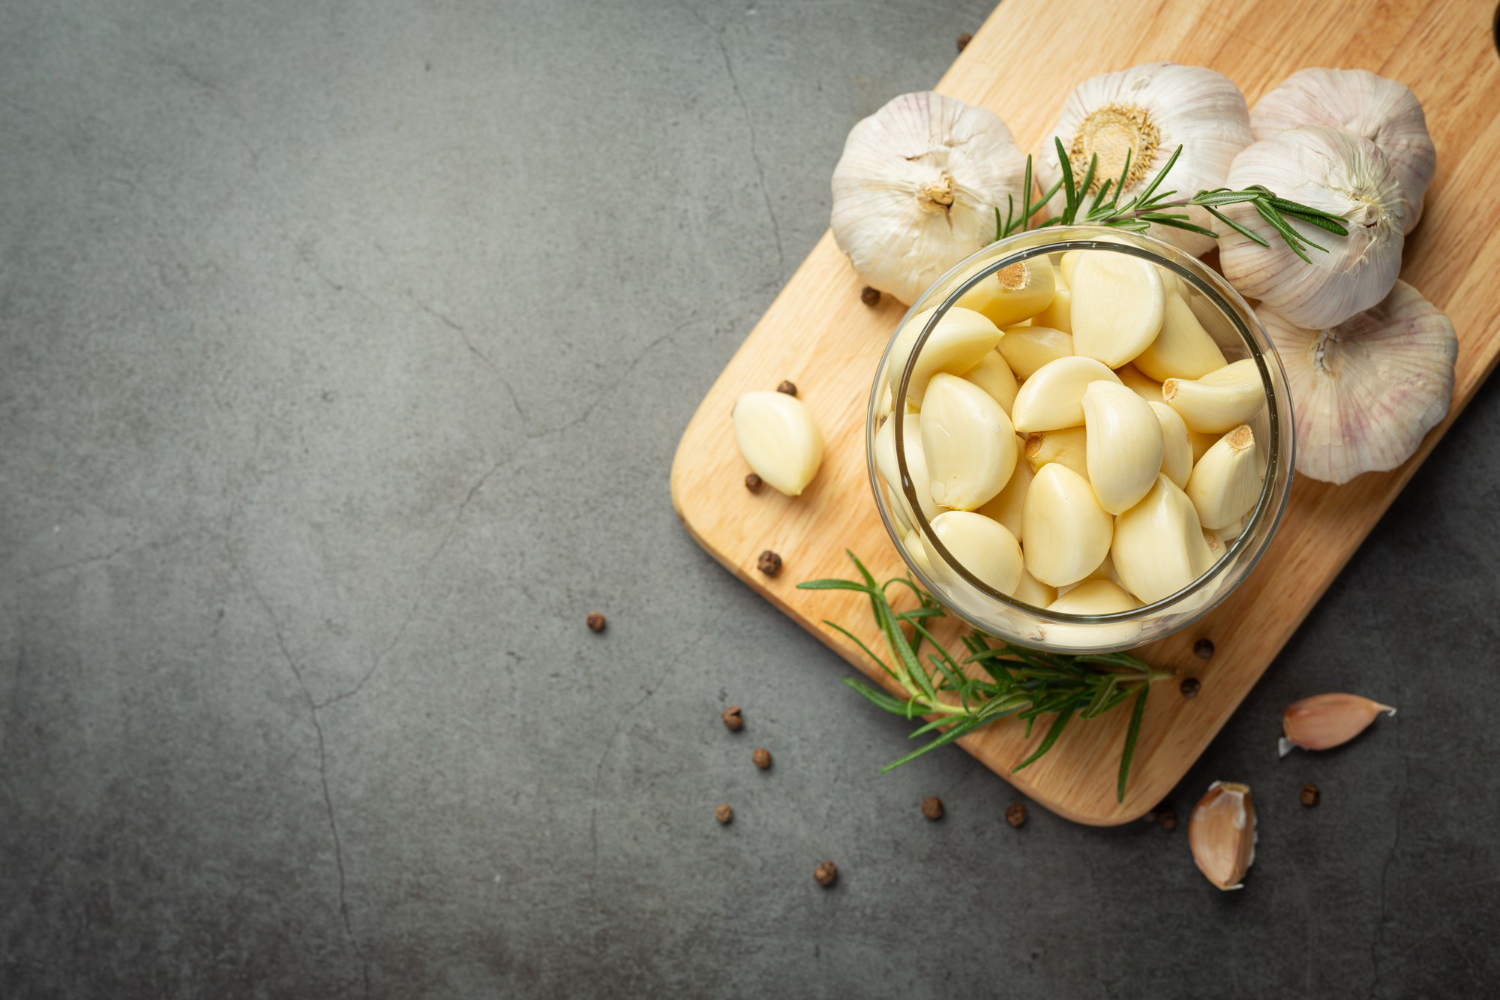 Garlic treatment for canker sores